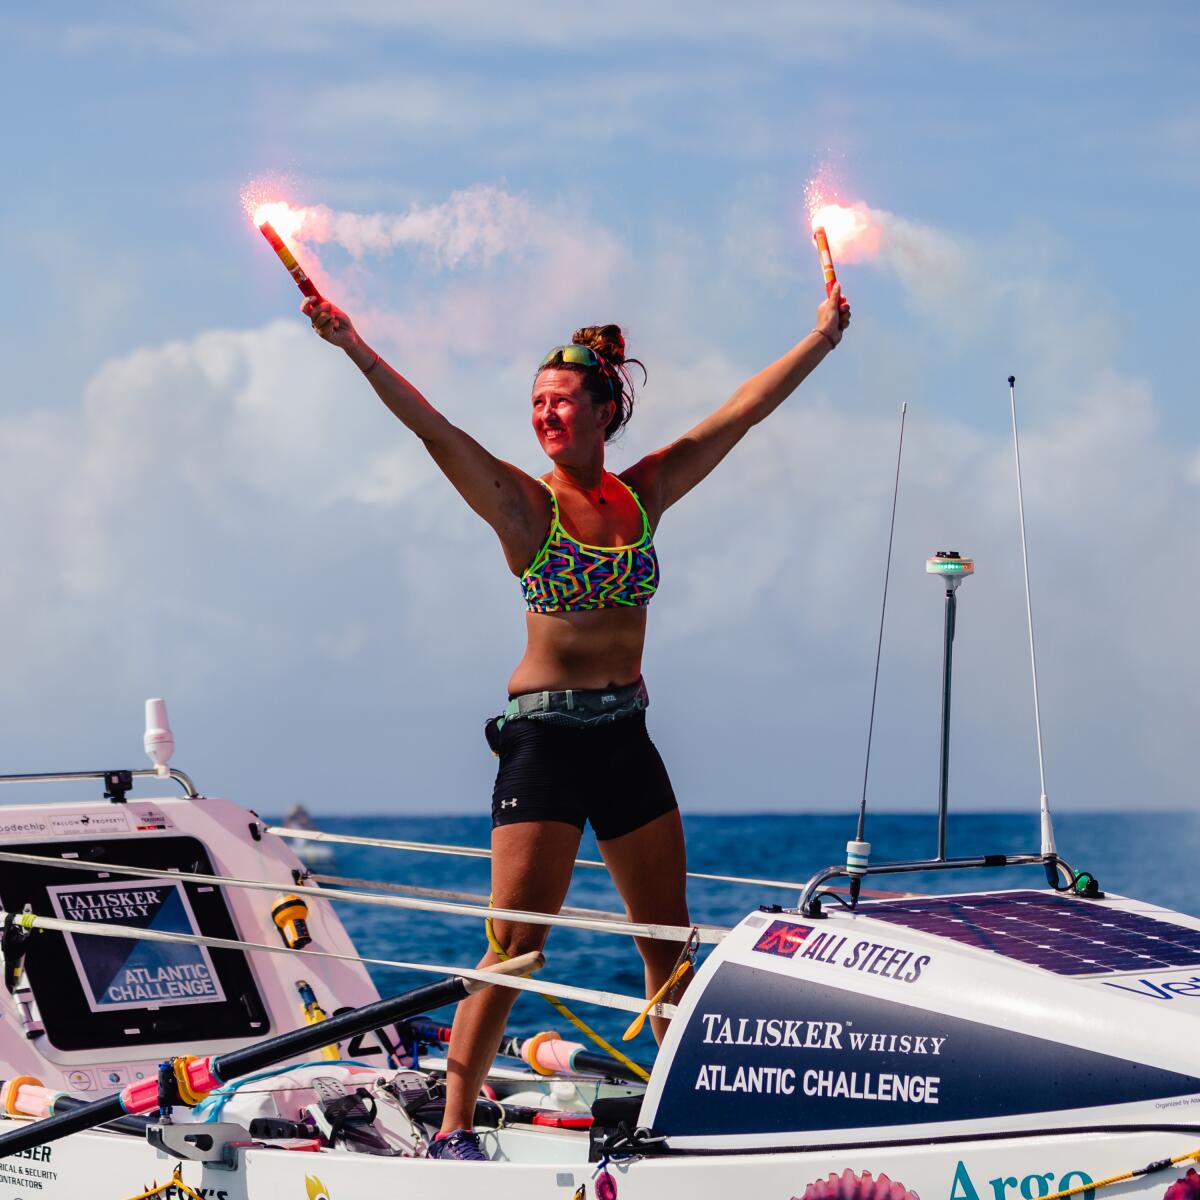 A woman standing in a rowing boat celebrates with her hands in the air